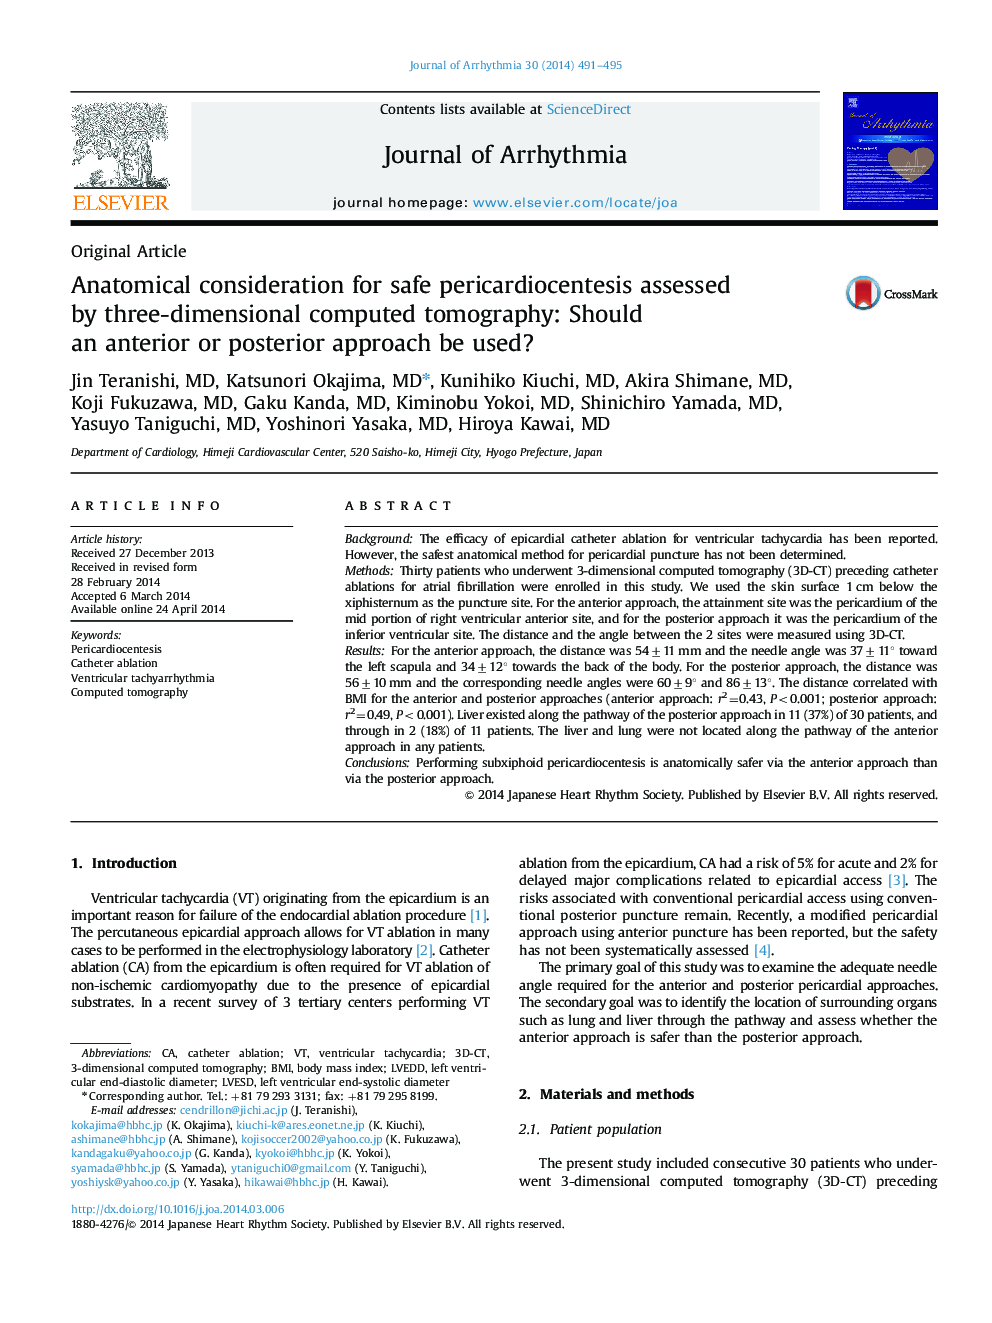 Anatomical consideration for safe pericardiocentesis assessed by three-dimensional computed tomography: Should an anterior or posterior approach be used?